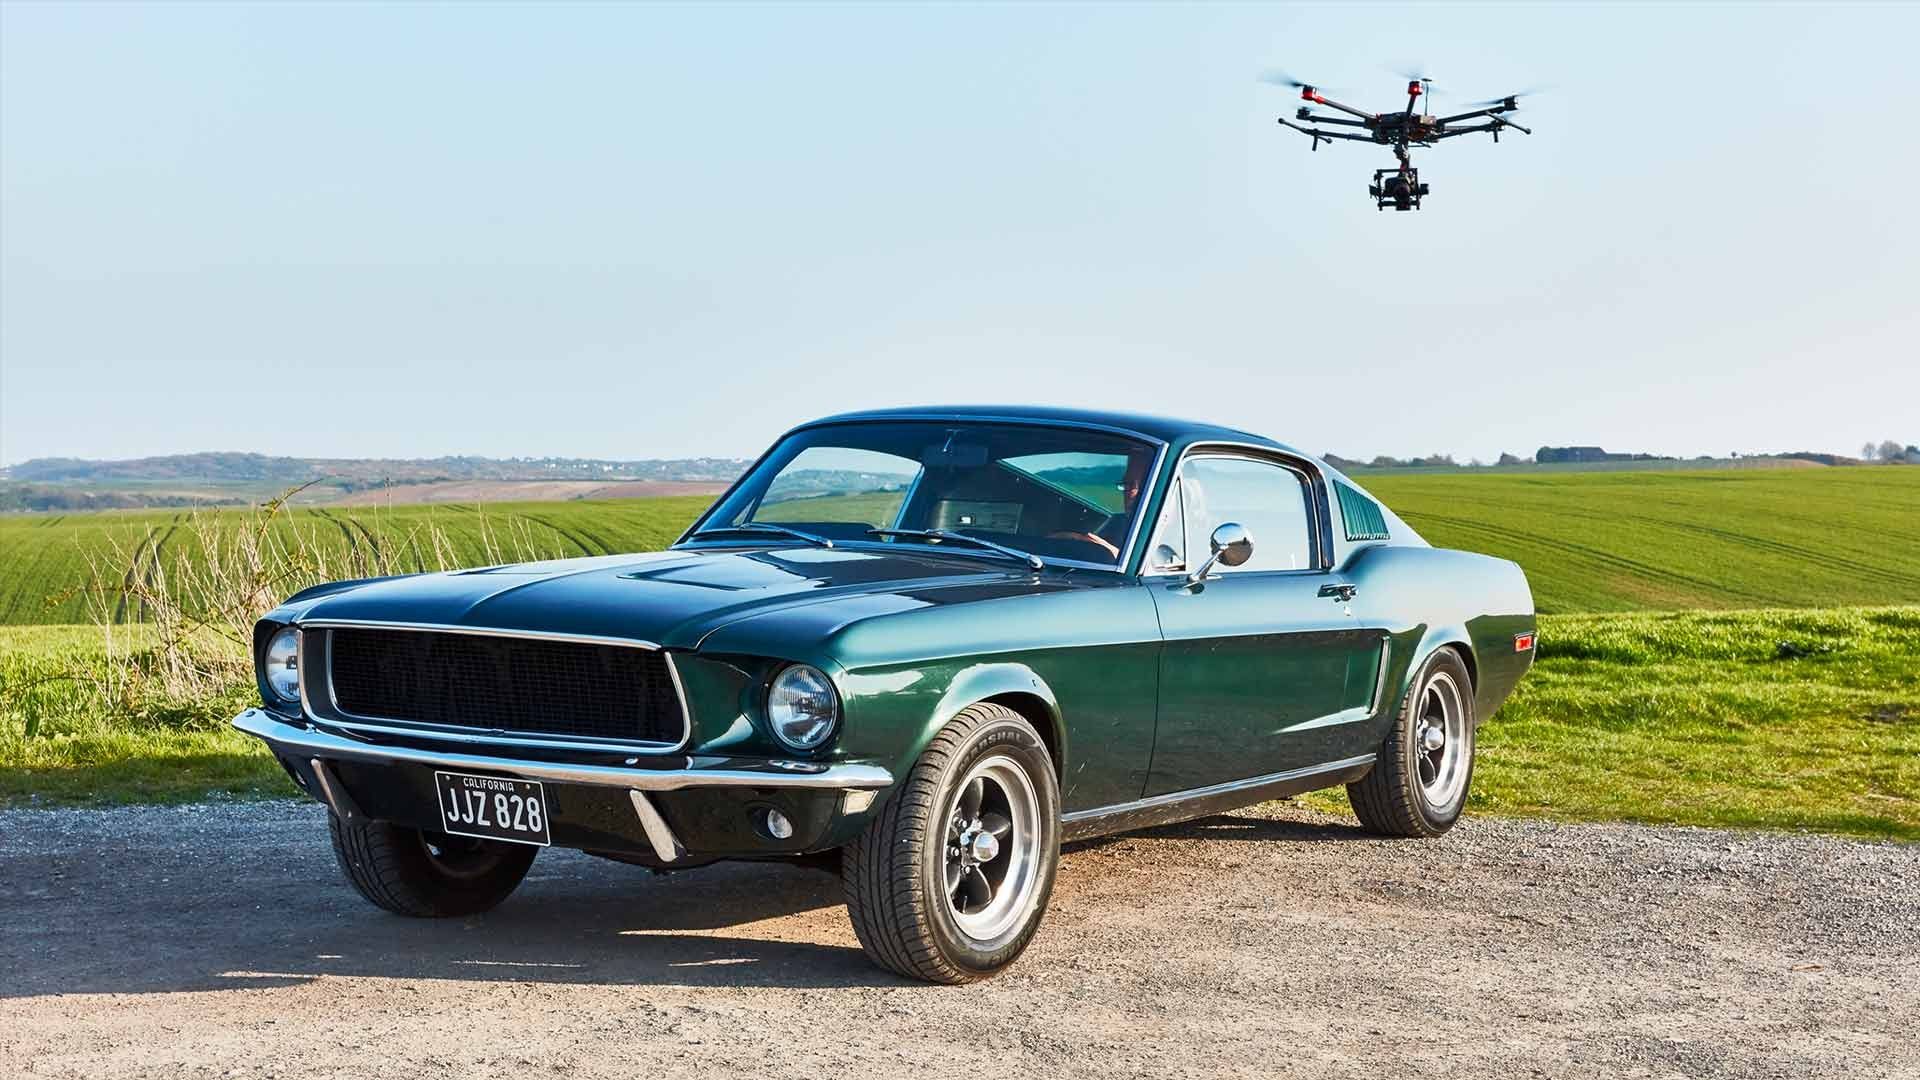 Drone flying over a vintage car